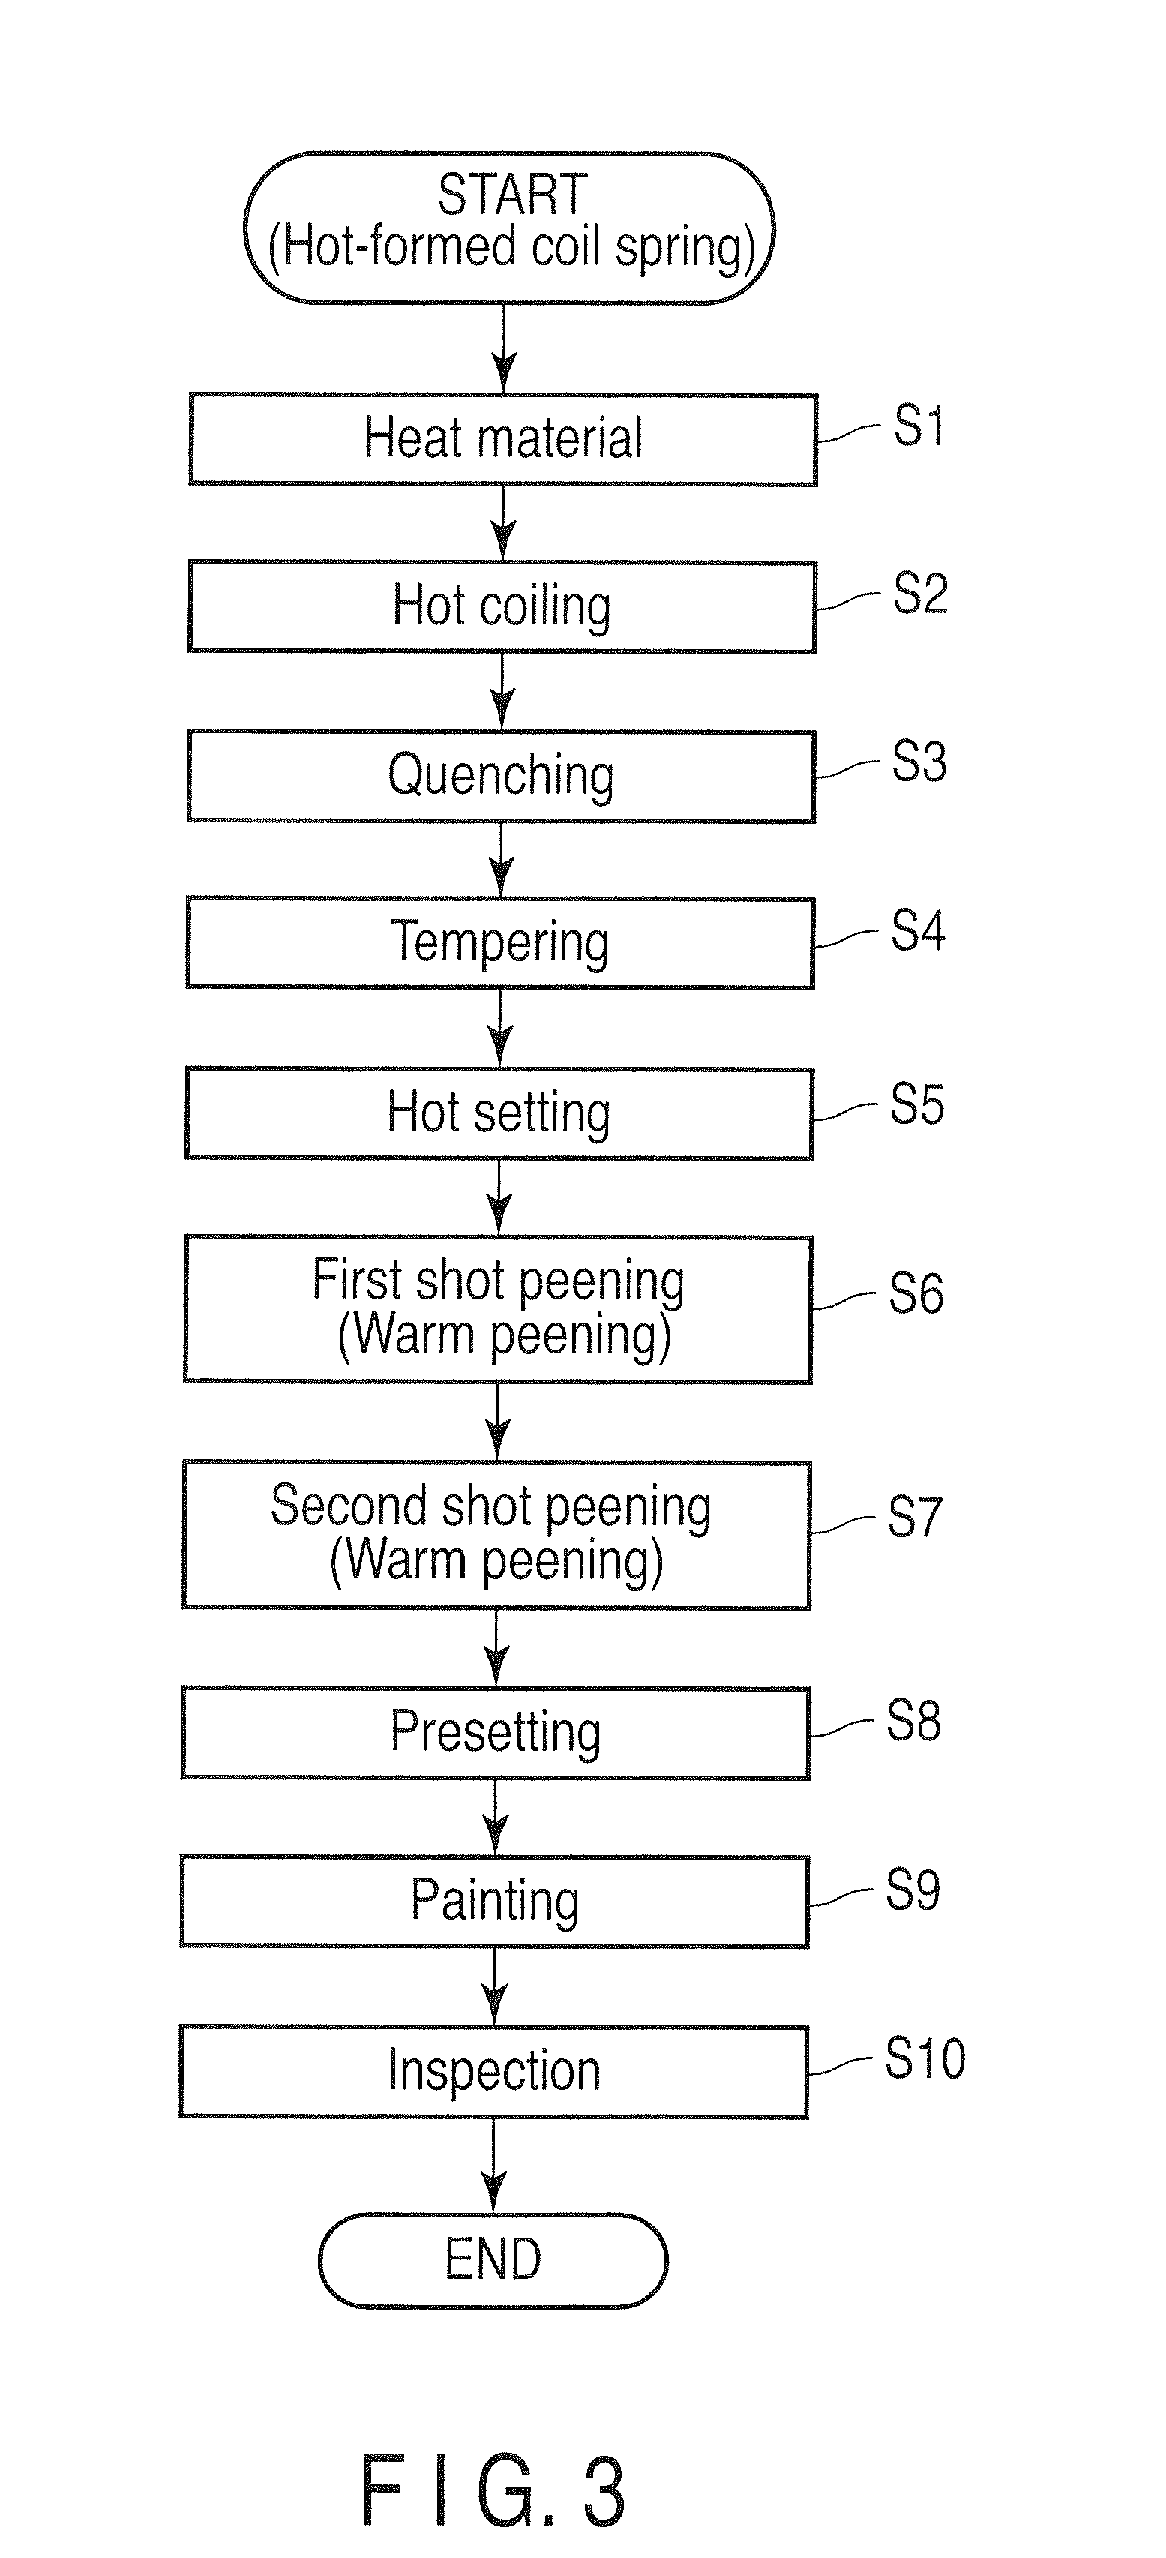 Manufacturing method for coil spring